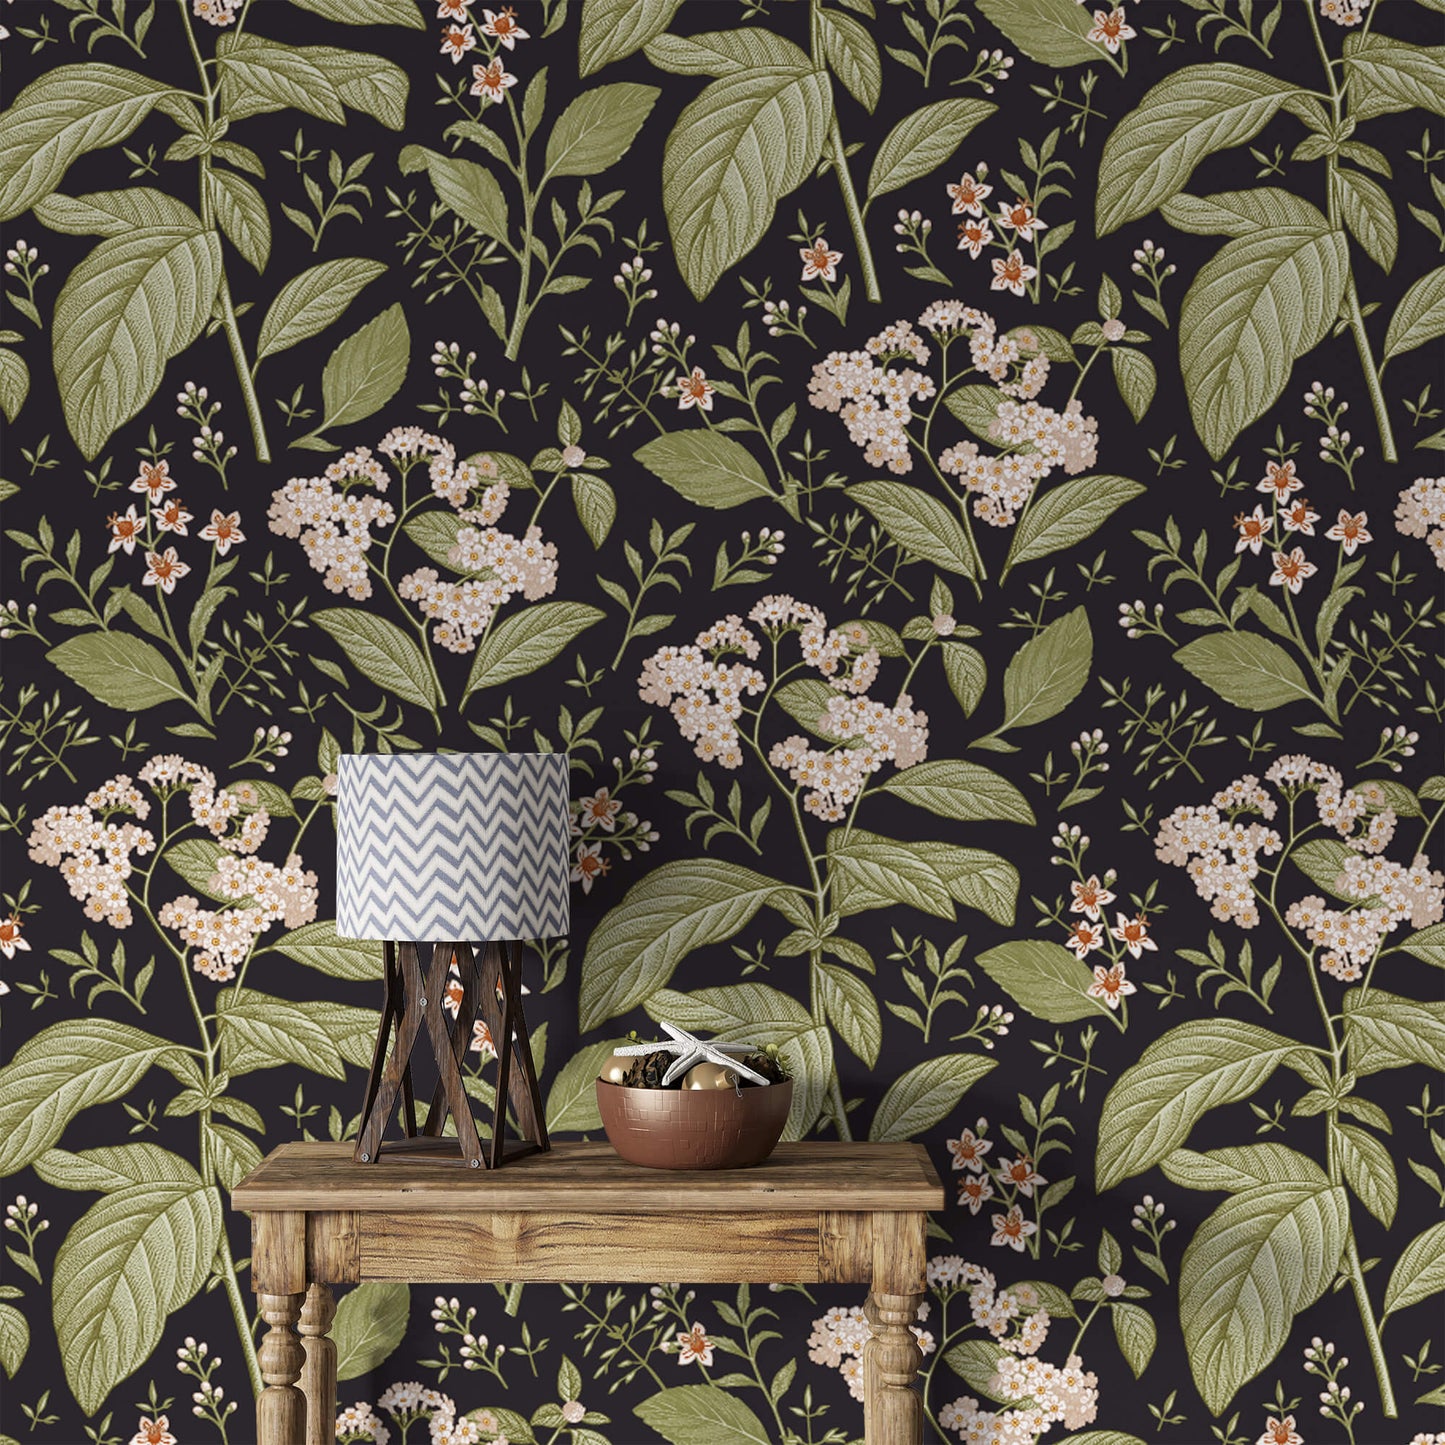 Victorian Bloom Midnight Wallpaper: Transport your space to an era of opulence with this elegant design, featuring intricate Victorian blooms against a midnight backdrop, evoking a sense of timeless luxury and romance.